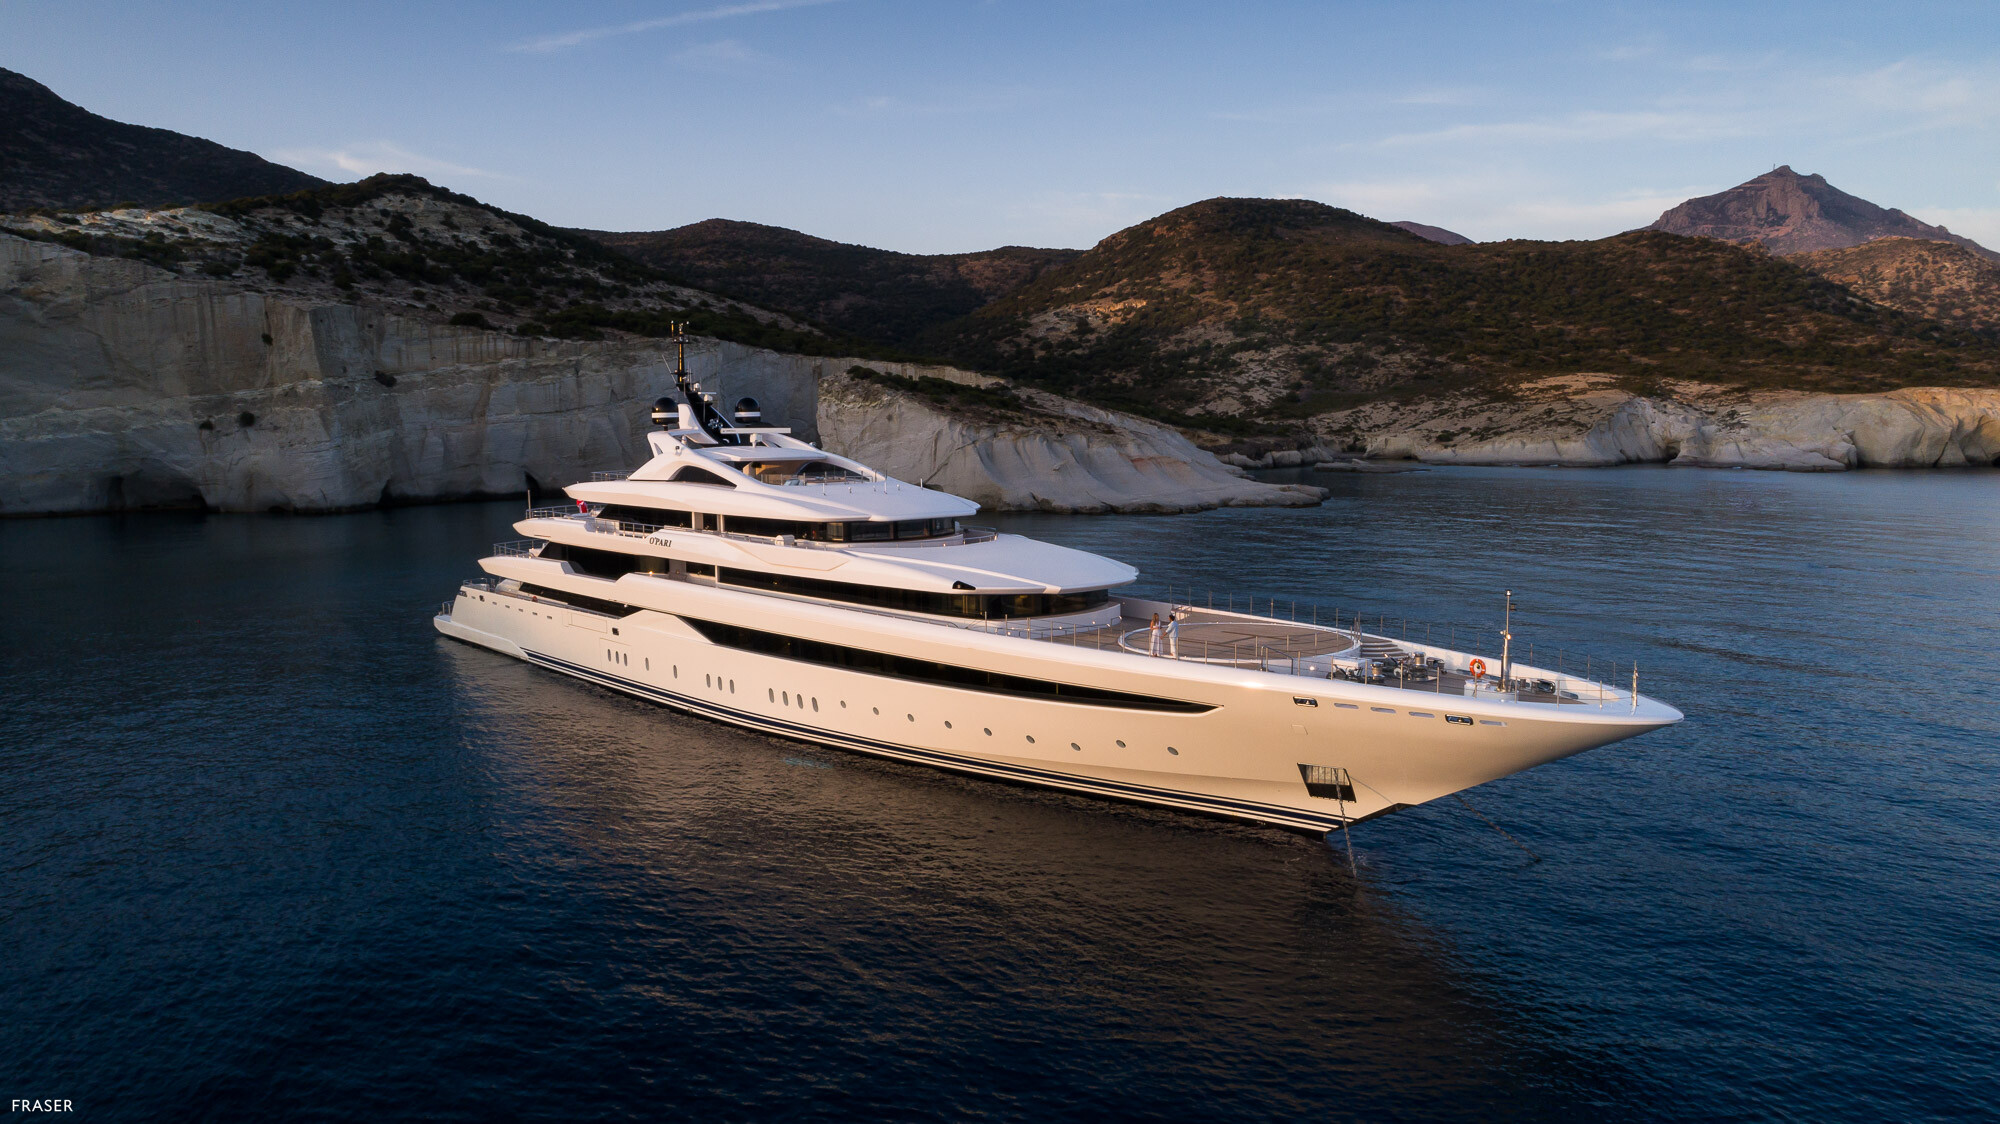 O'PARI motor yacht for charter by FRASER, built by Golden Yachts Ltd.